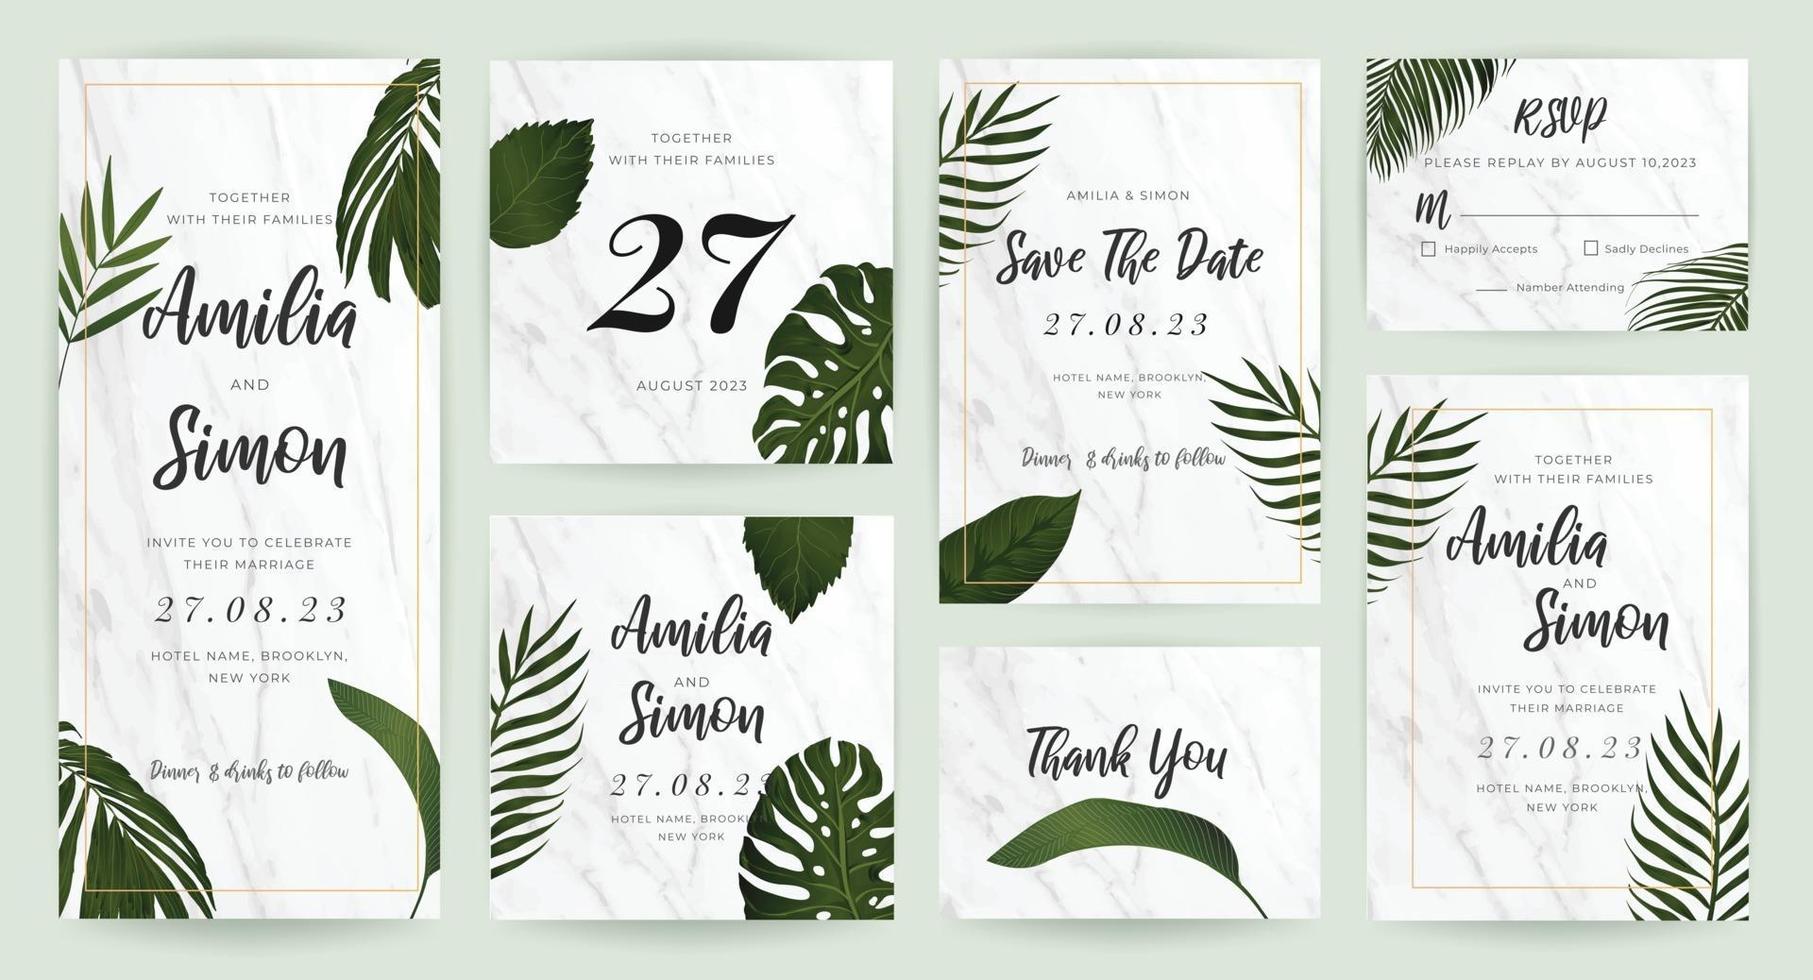 Tropical gold wedding invitation card design vector collection. Stationary design for vip banner, print and cover background.